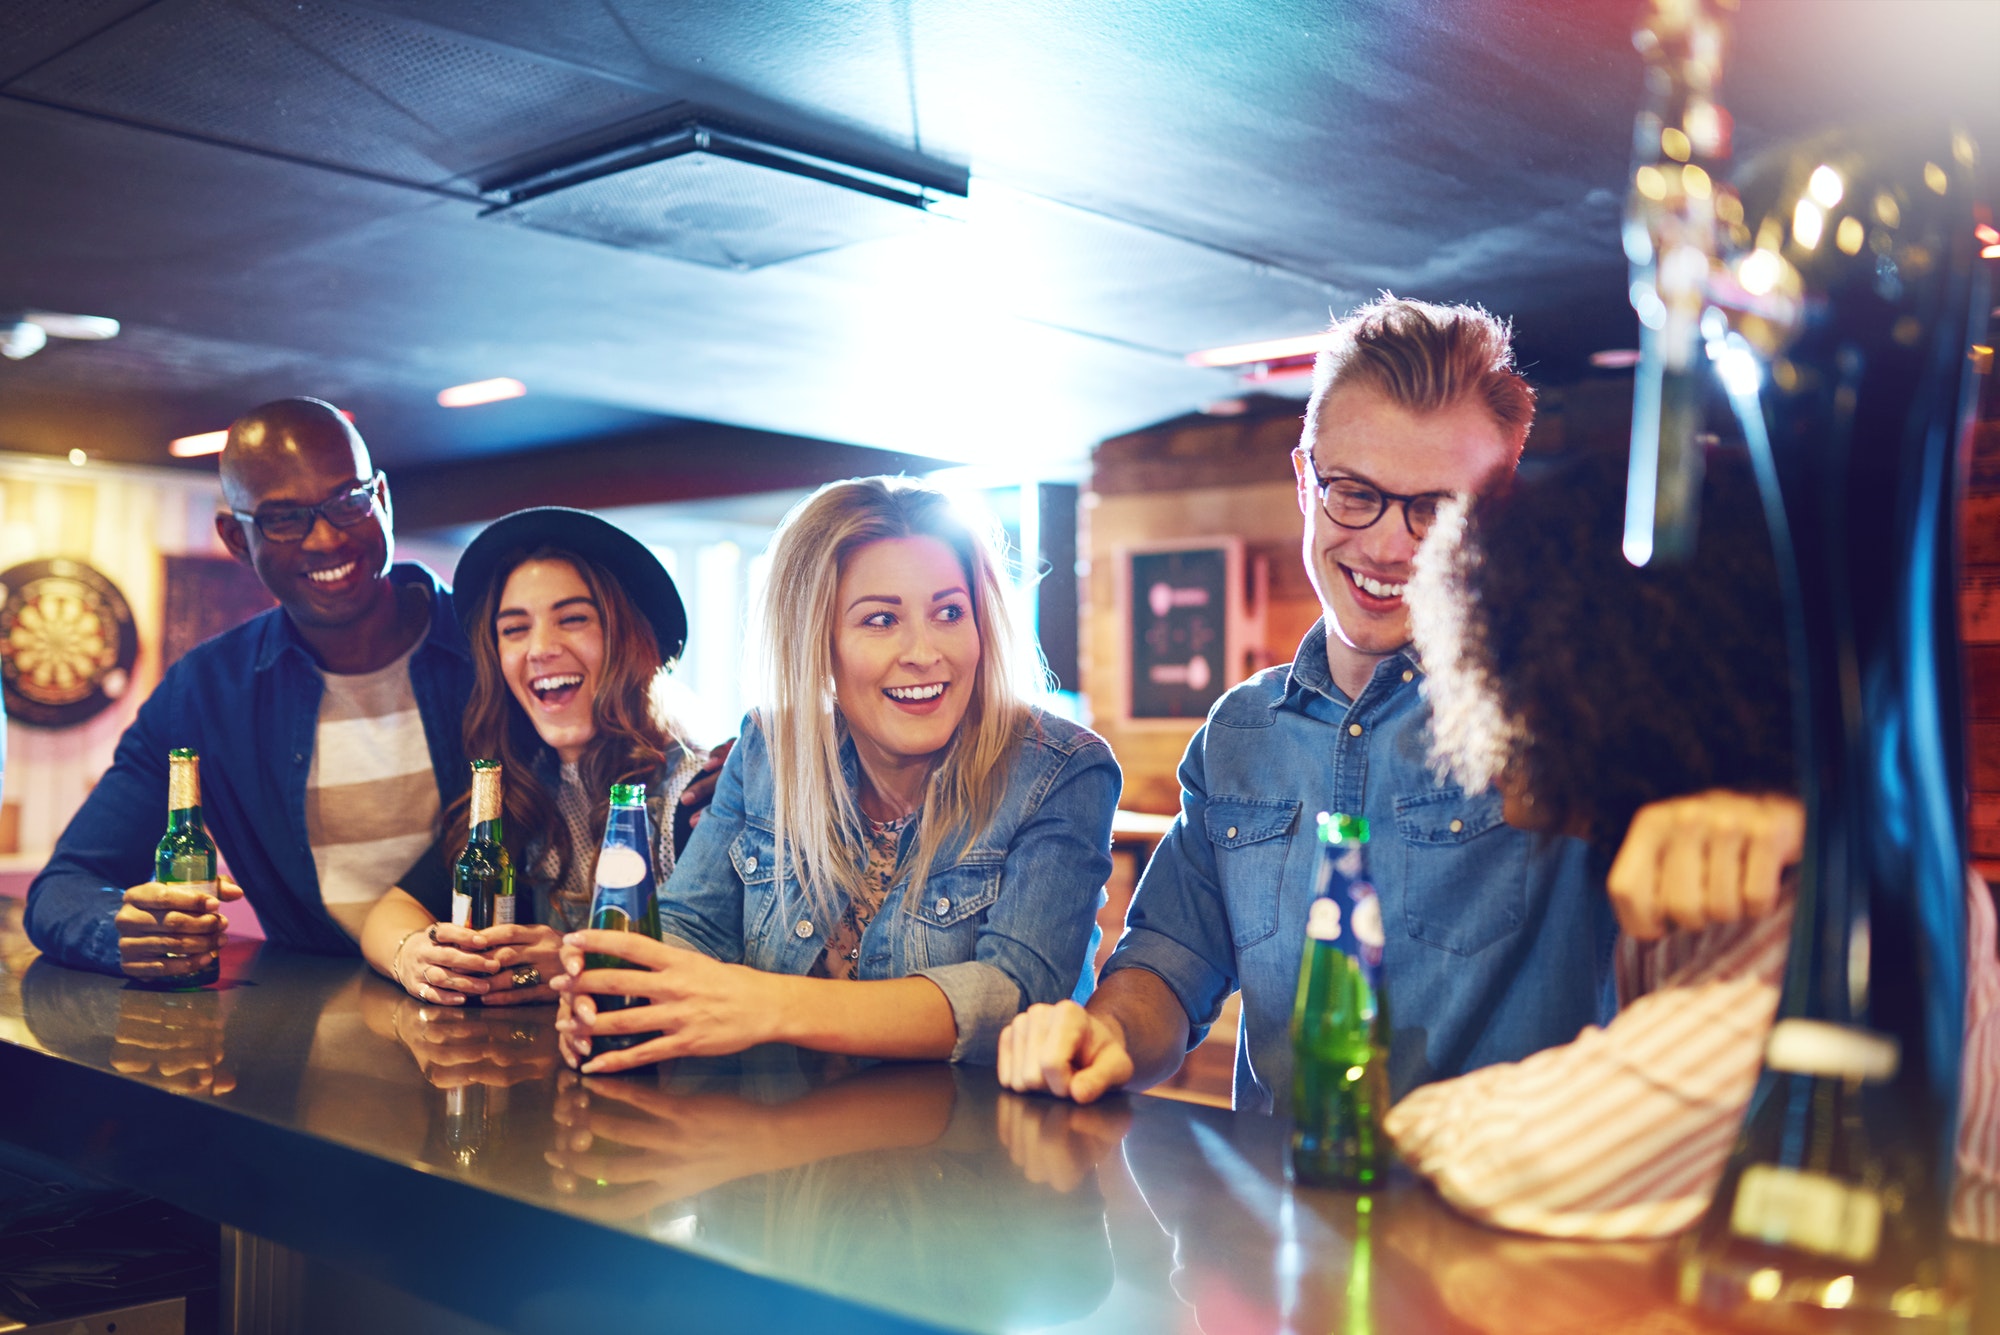 Group of happy people at bar counter